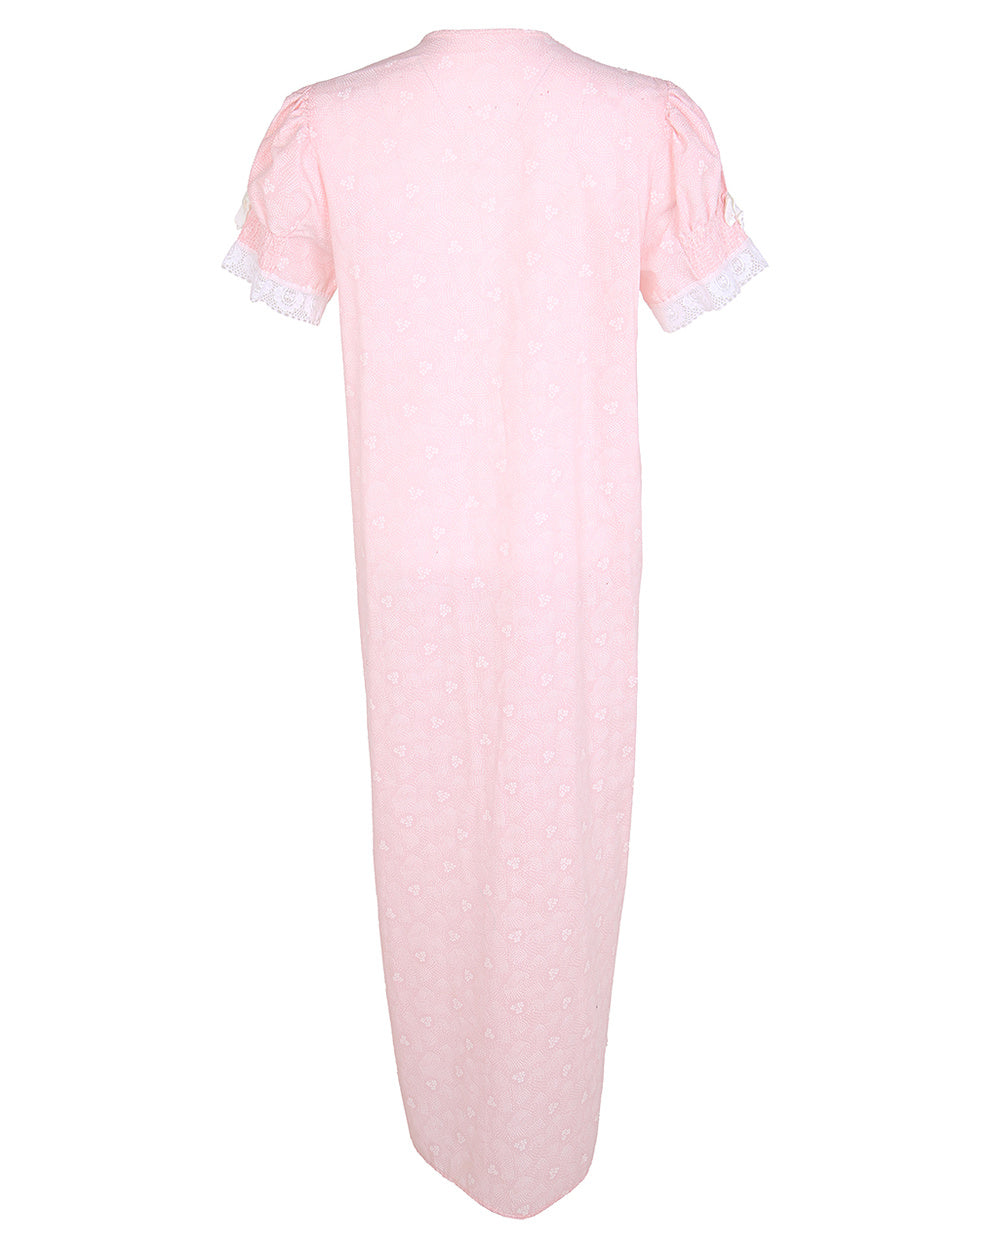 70s Pale Pink & White Patterned Dressing Gown - M